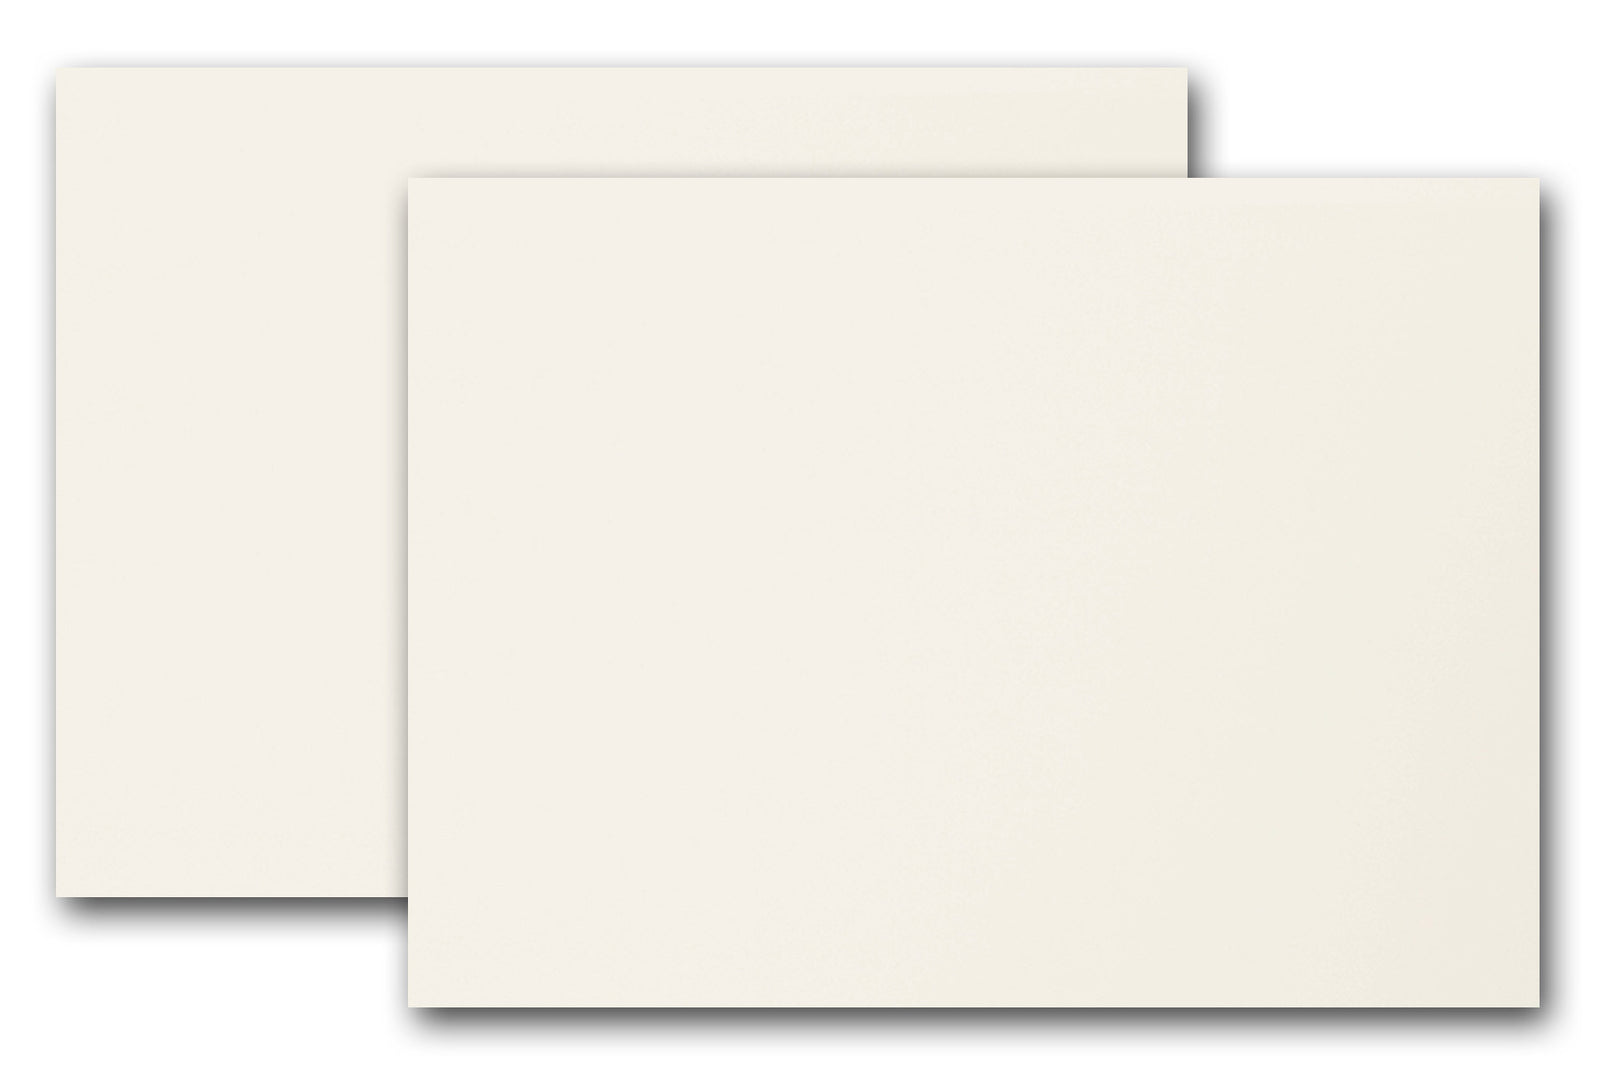 Premium White 5 x 7 Cardstock - 120lb Cover Ultra Thick Artist Drawing  Quality Eggshell Finish - For Invitations, Postcards, Sketching, Charcoal